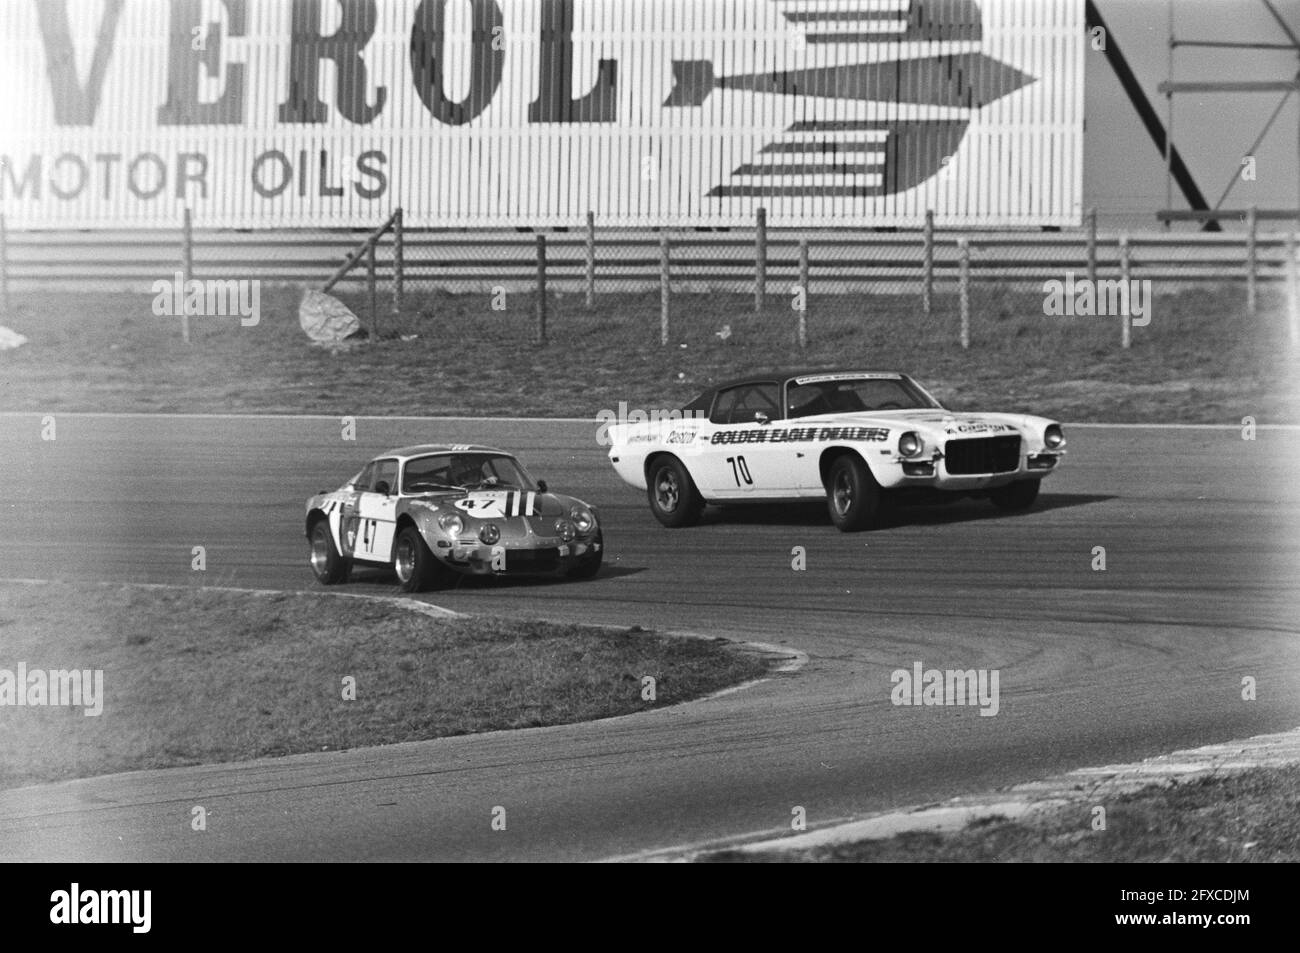 Opening races at Zandvoort; Cleutjens with Renault Alpine (left) and Slotemakers with Chevrolet Camaro (right), March 28, 1976, auto races, The Netherlands, 20th century press agency photo, news to remember, documentary, historic photography 1945-1990, visual stories, human history of the Twentieth Century, capturing moments in time Stock Photo